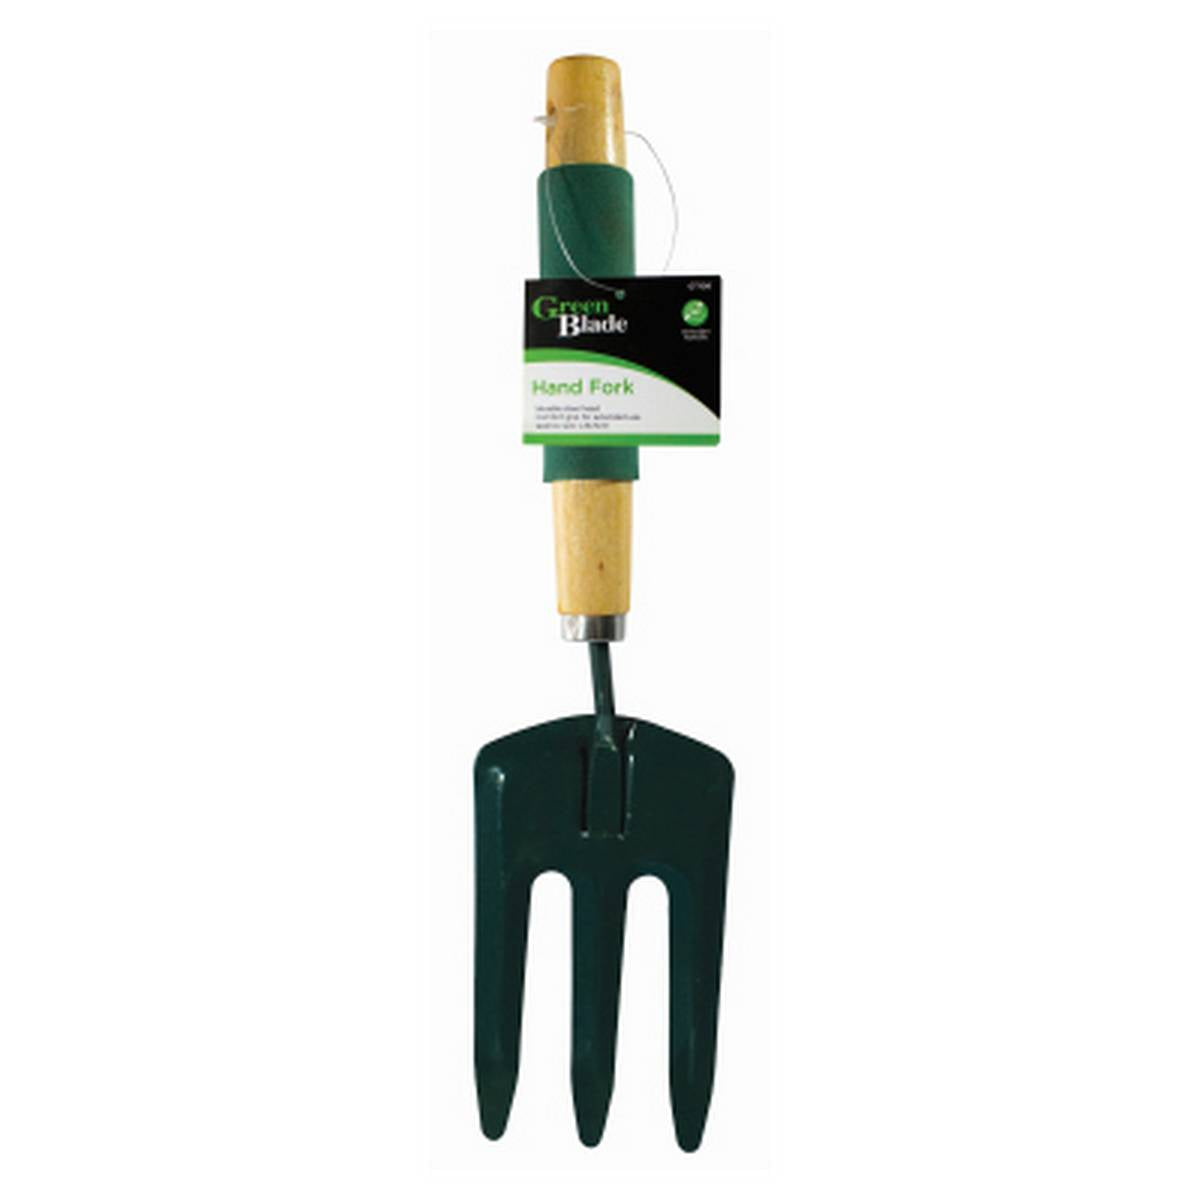 GREENBLADE GREEN BLADE HAND FORK WITH CUSHION GRIP WOODEN HANDLE BB-GT108